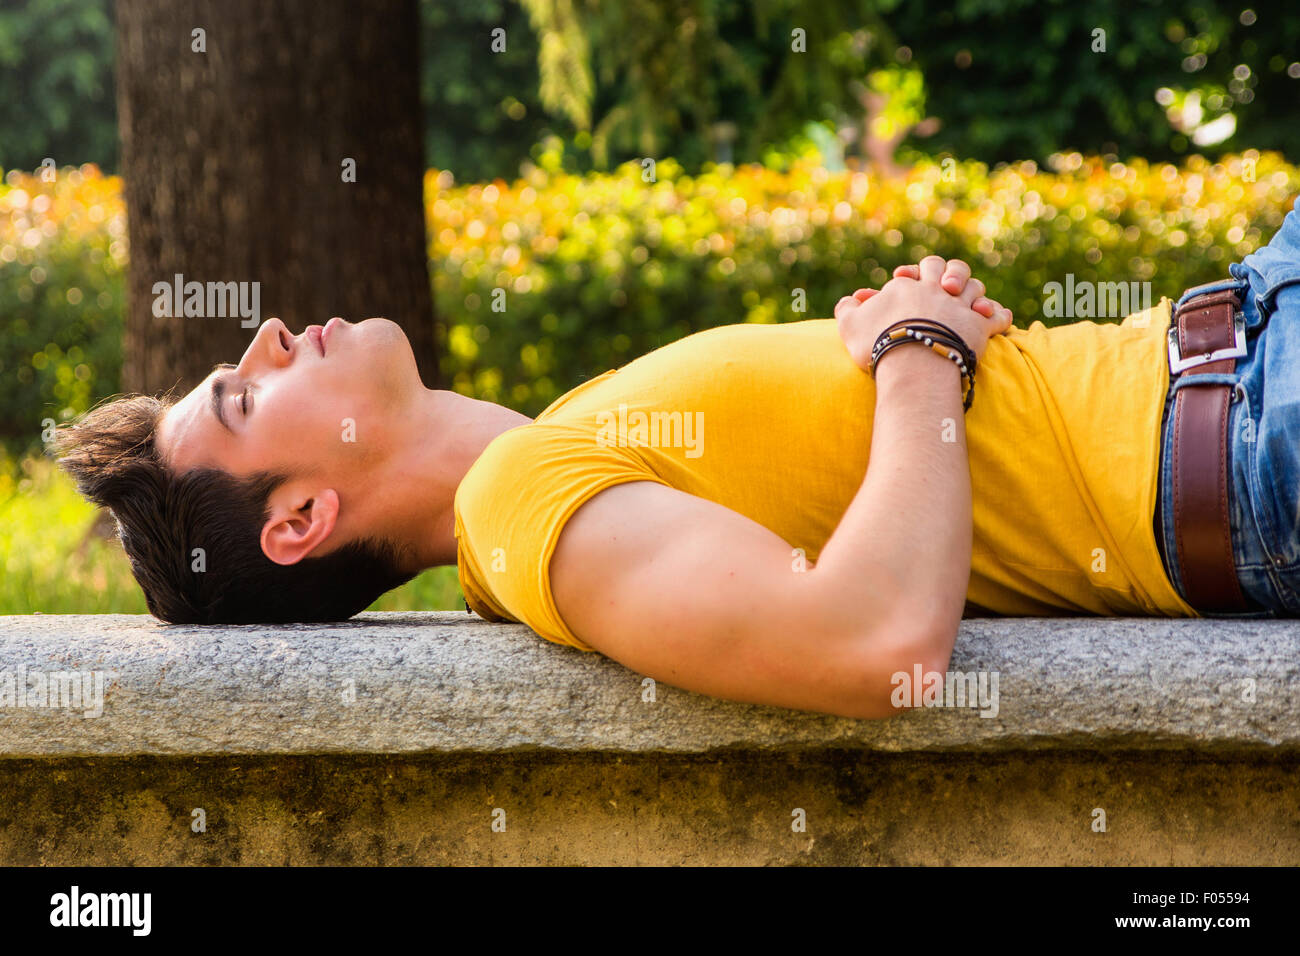 Attractive young man sleeping on stone bench outdoor in city park during day Stock Photo